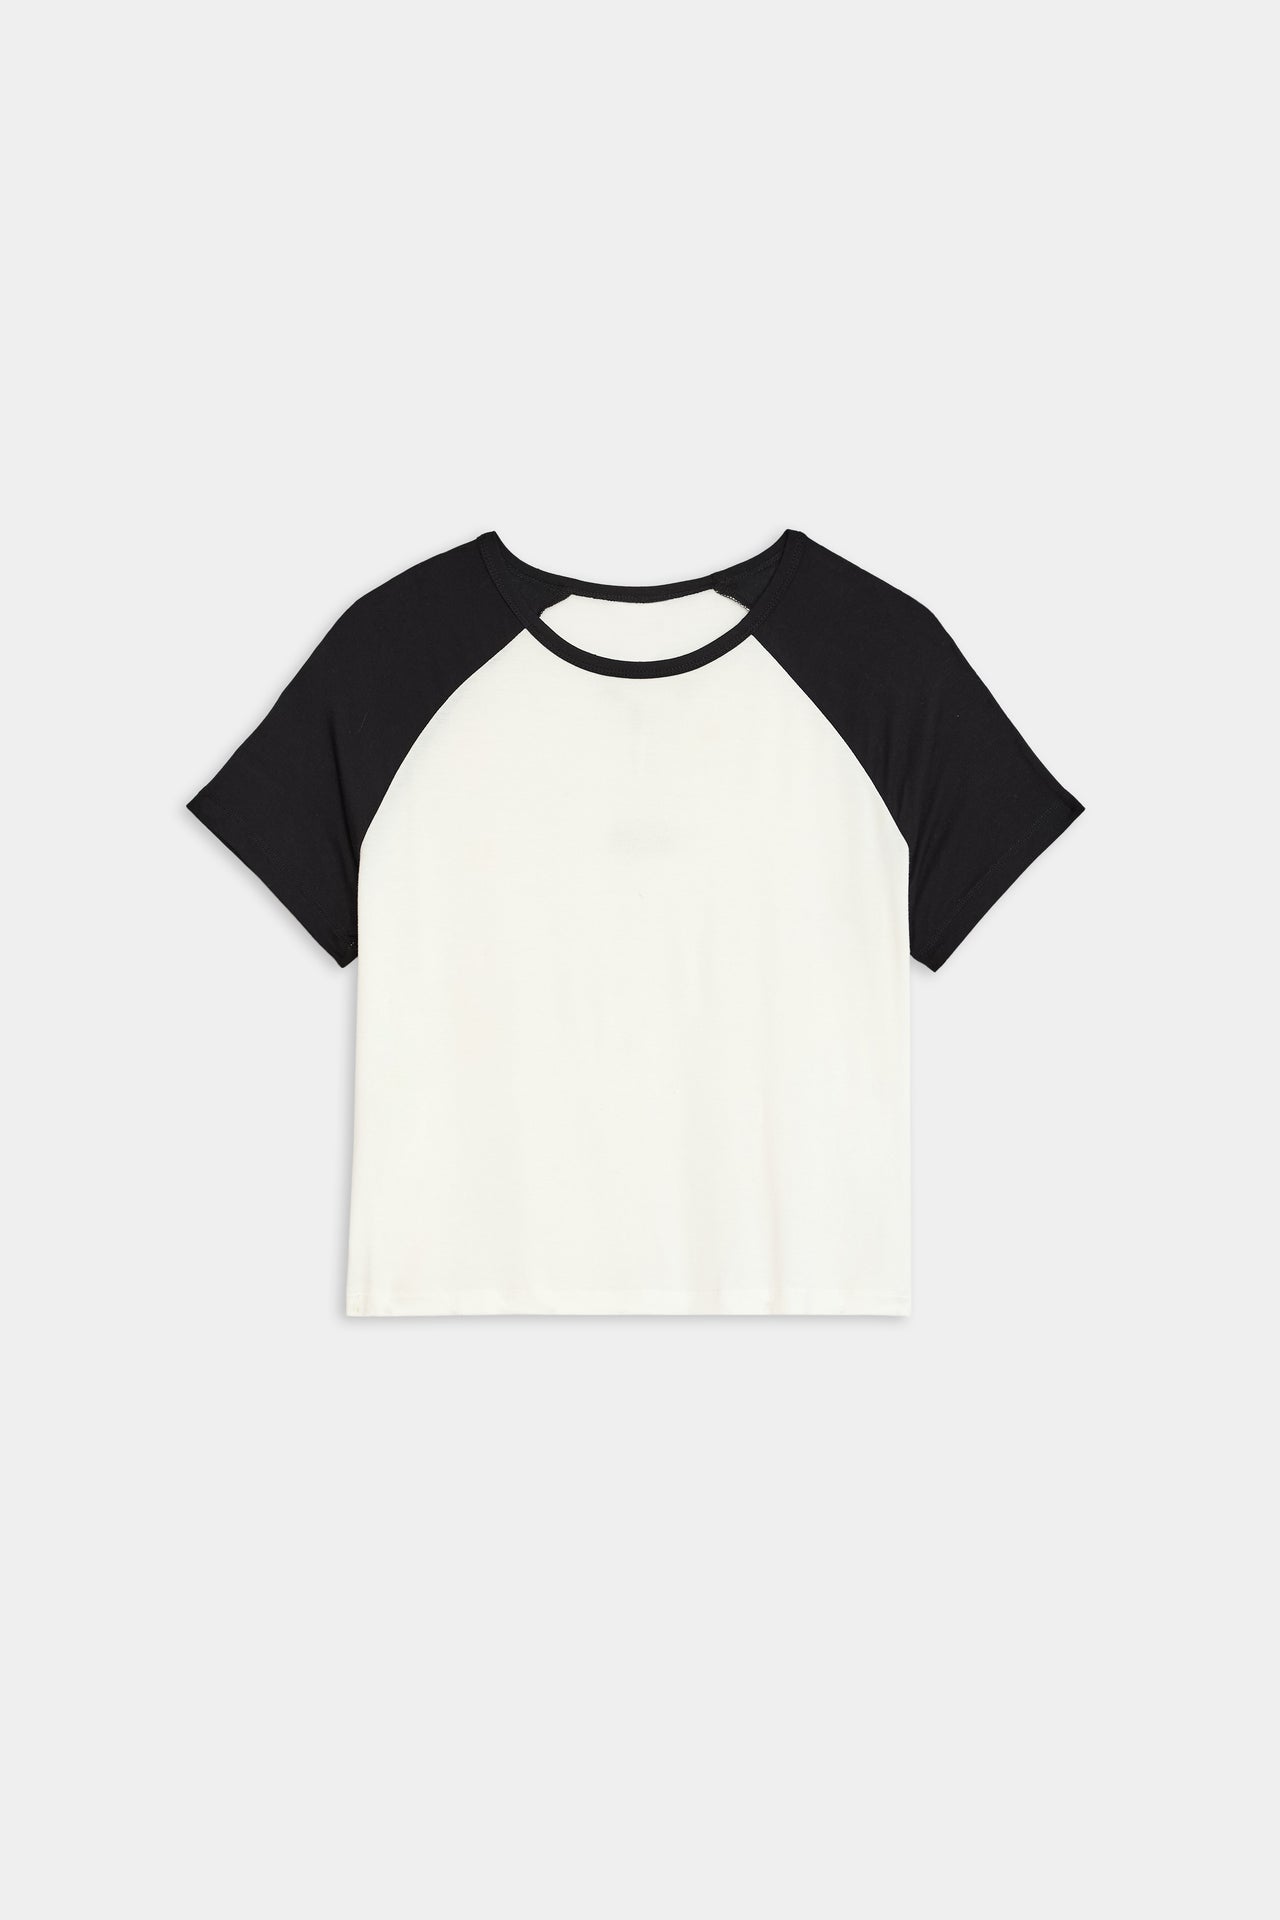 A SPLITS59 black and white Baseball Jersey Tee, perfect for relaxed fit gym workouts.